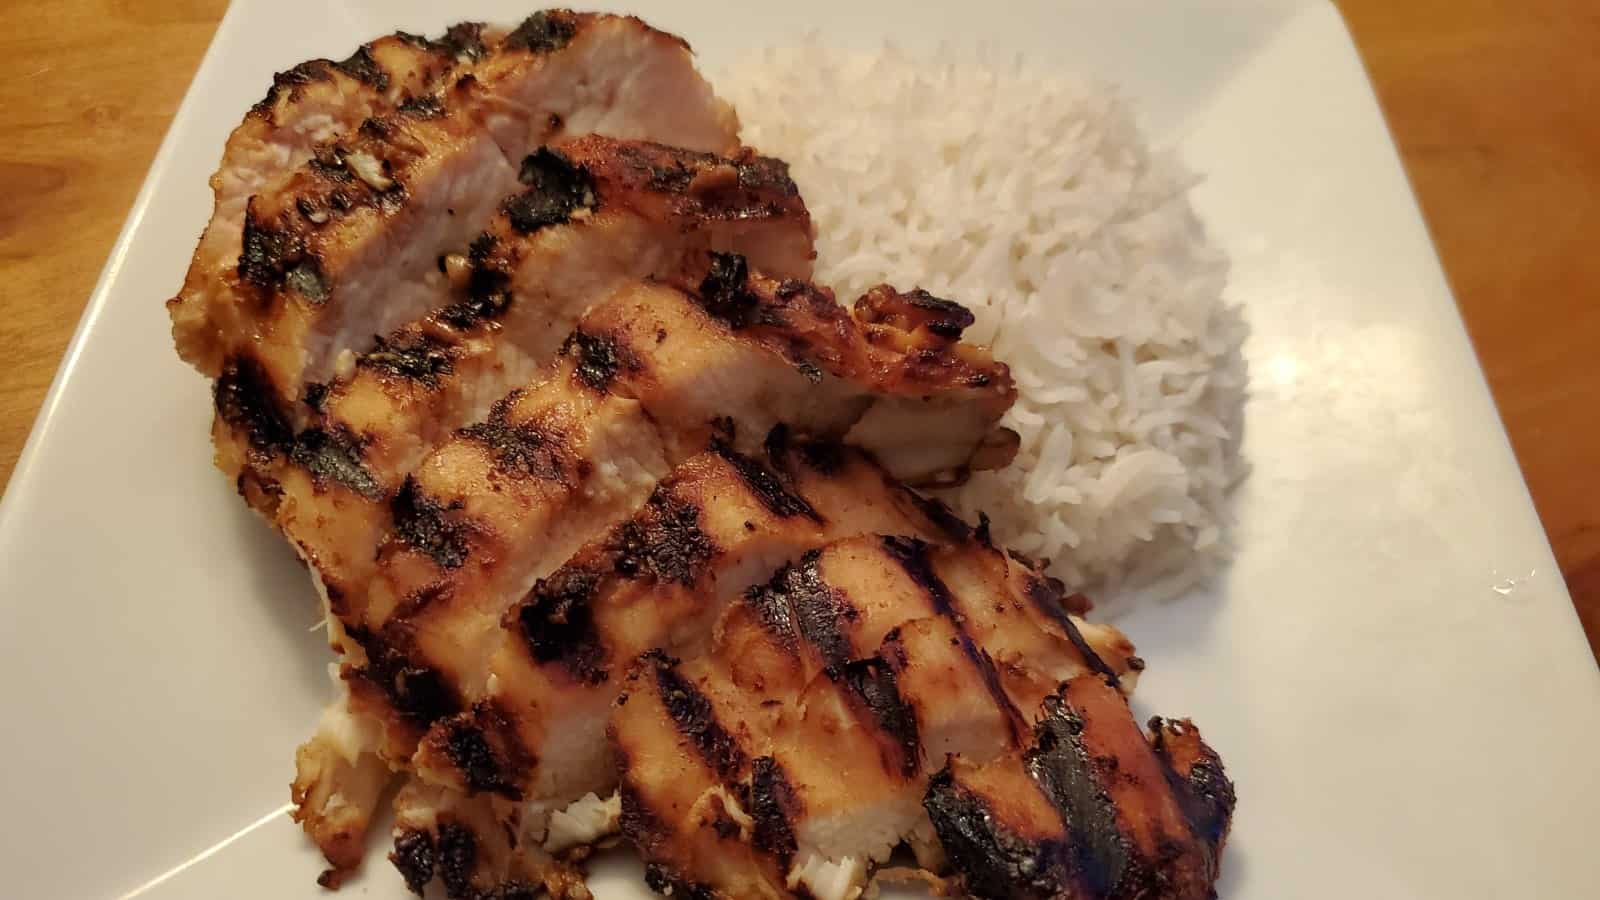 Miso glazed chicken with rice on a white plate.